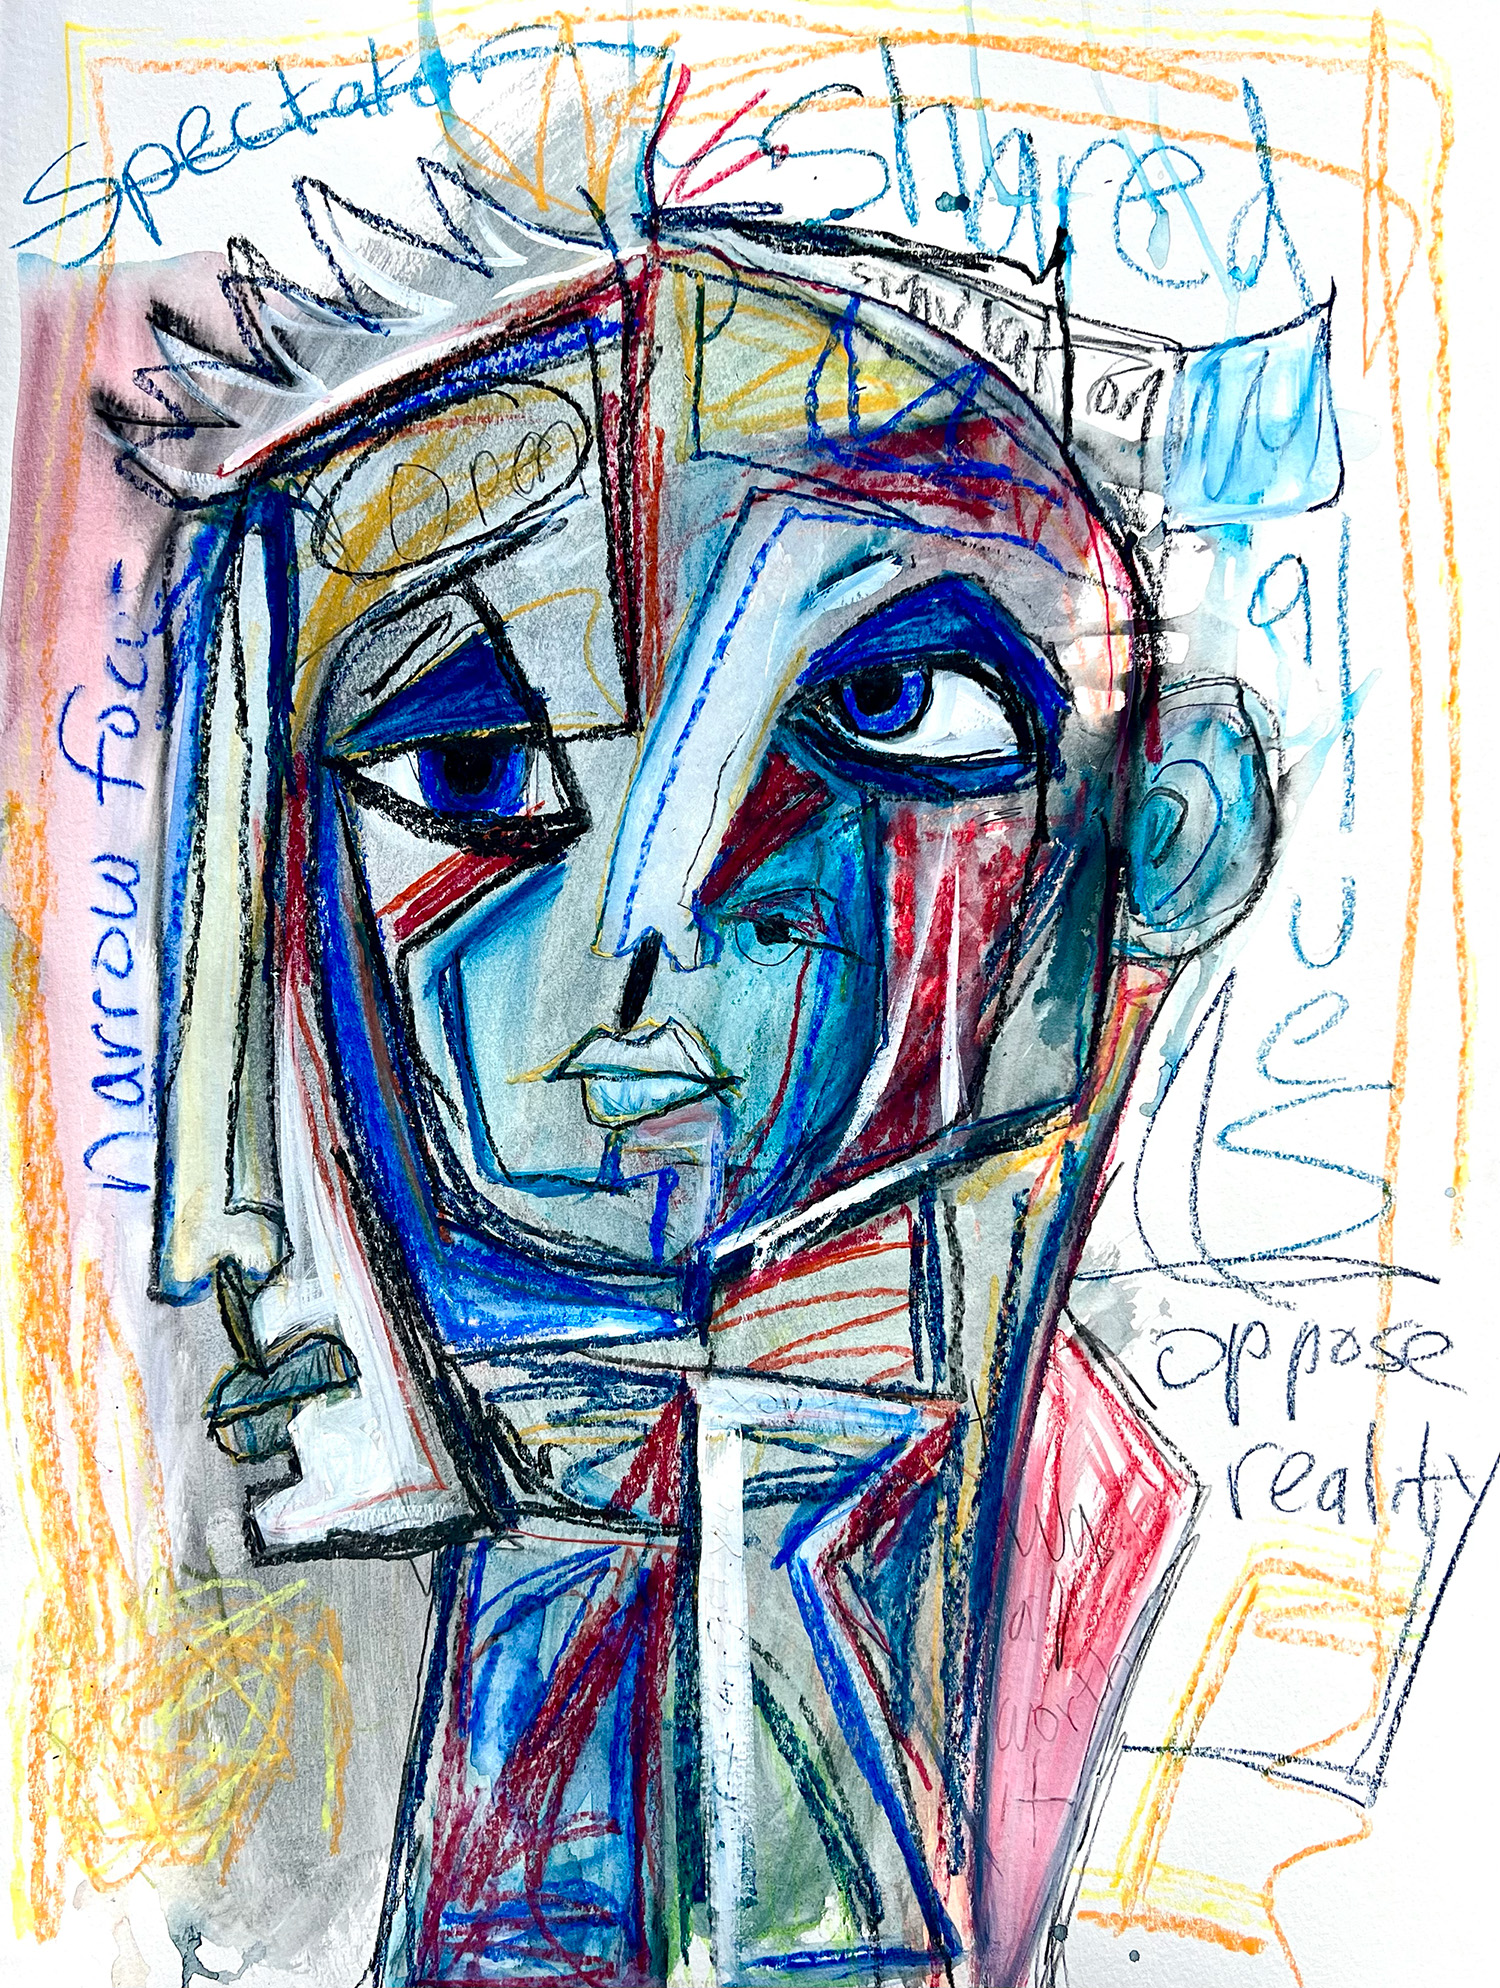 Gabe Weis (American, 20th century), Oppose Reality, 2023, mixed media with watercolor crayons, acrylic paint, and graphite on watercolor paper, paper: 30″ x 22.5″.